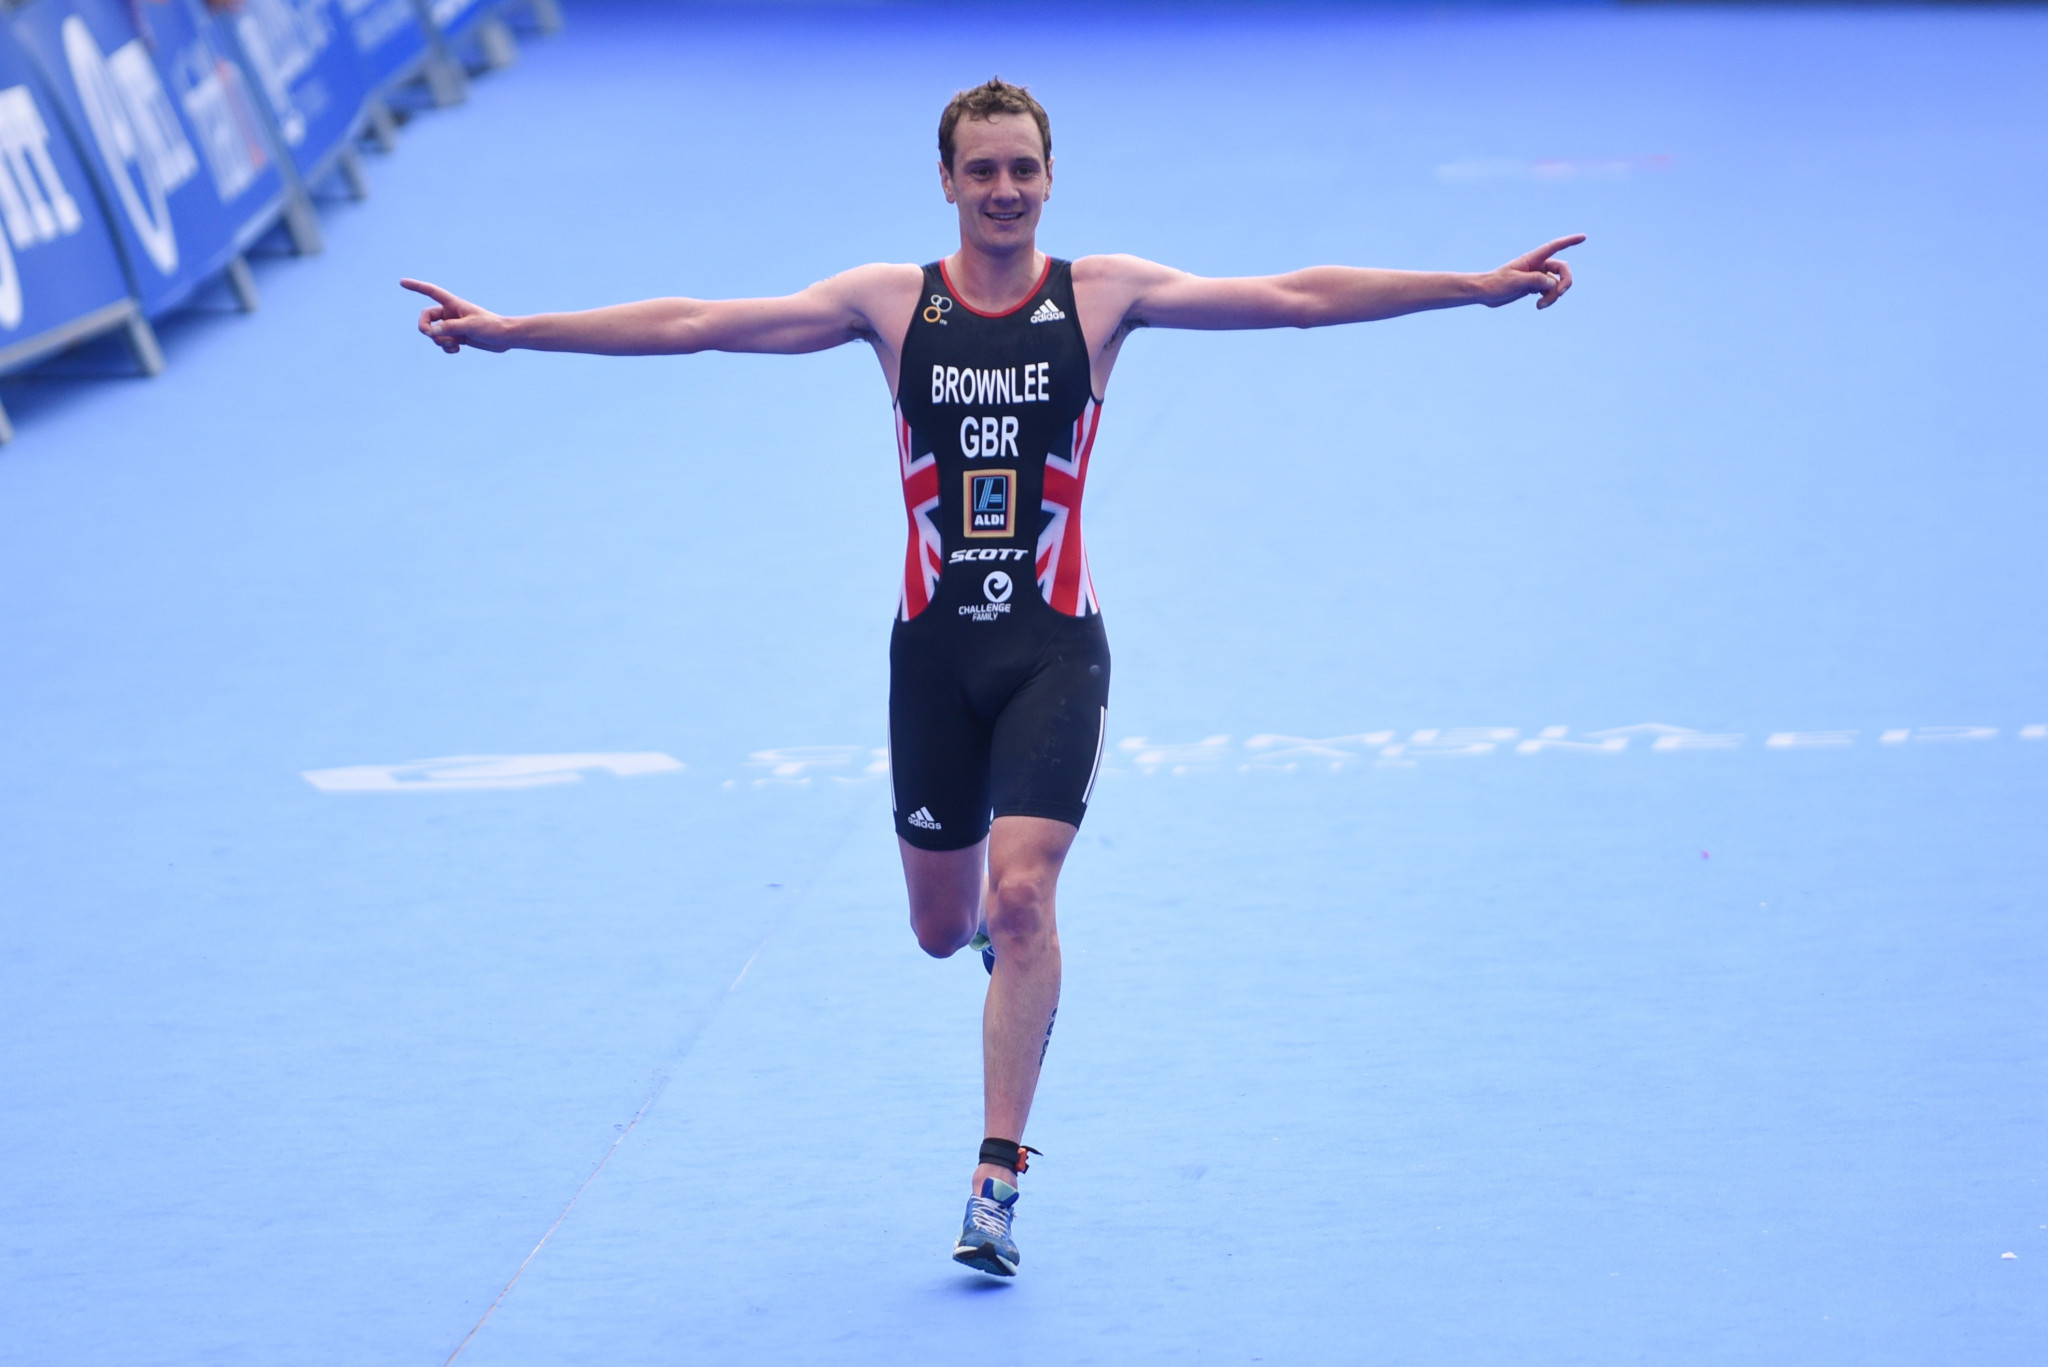 Alistair Brownlee will defend his Commonwealth Games title at Gold Coast 2018 ©Getty Images